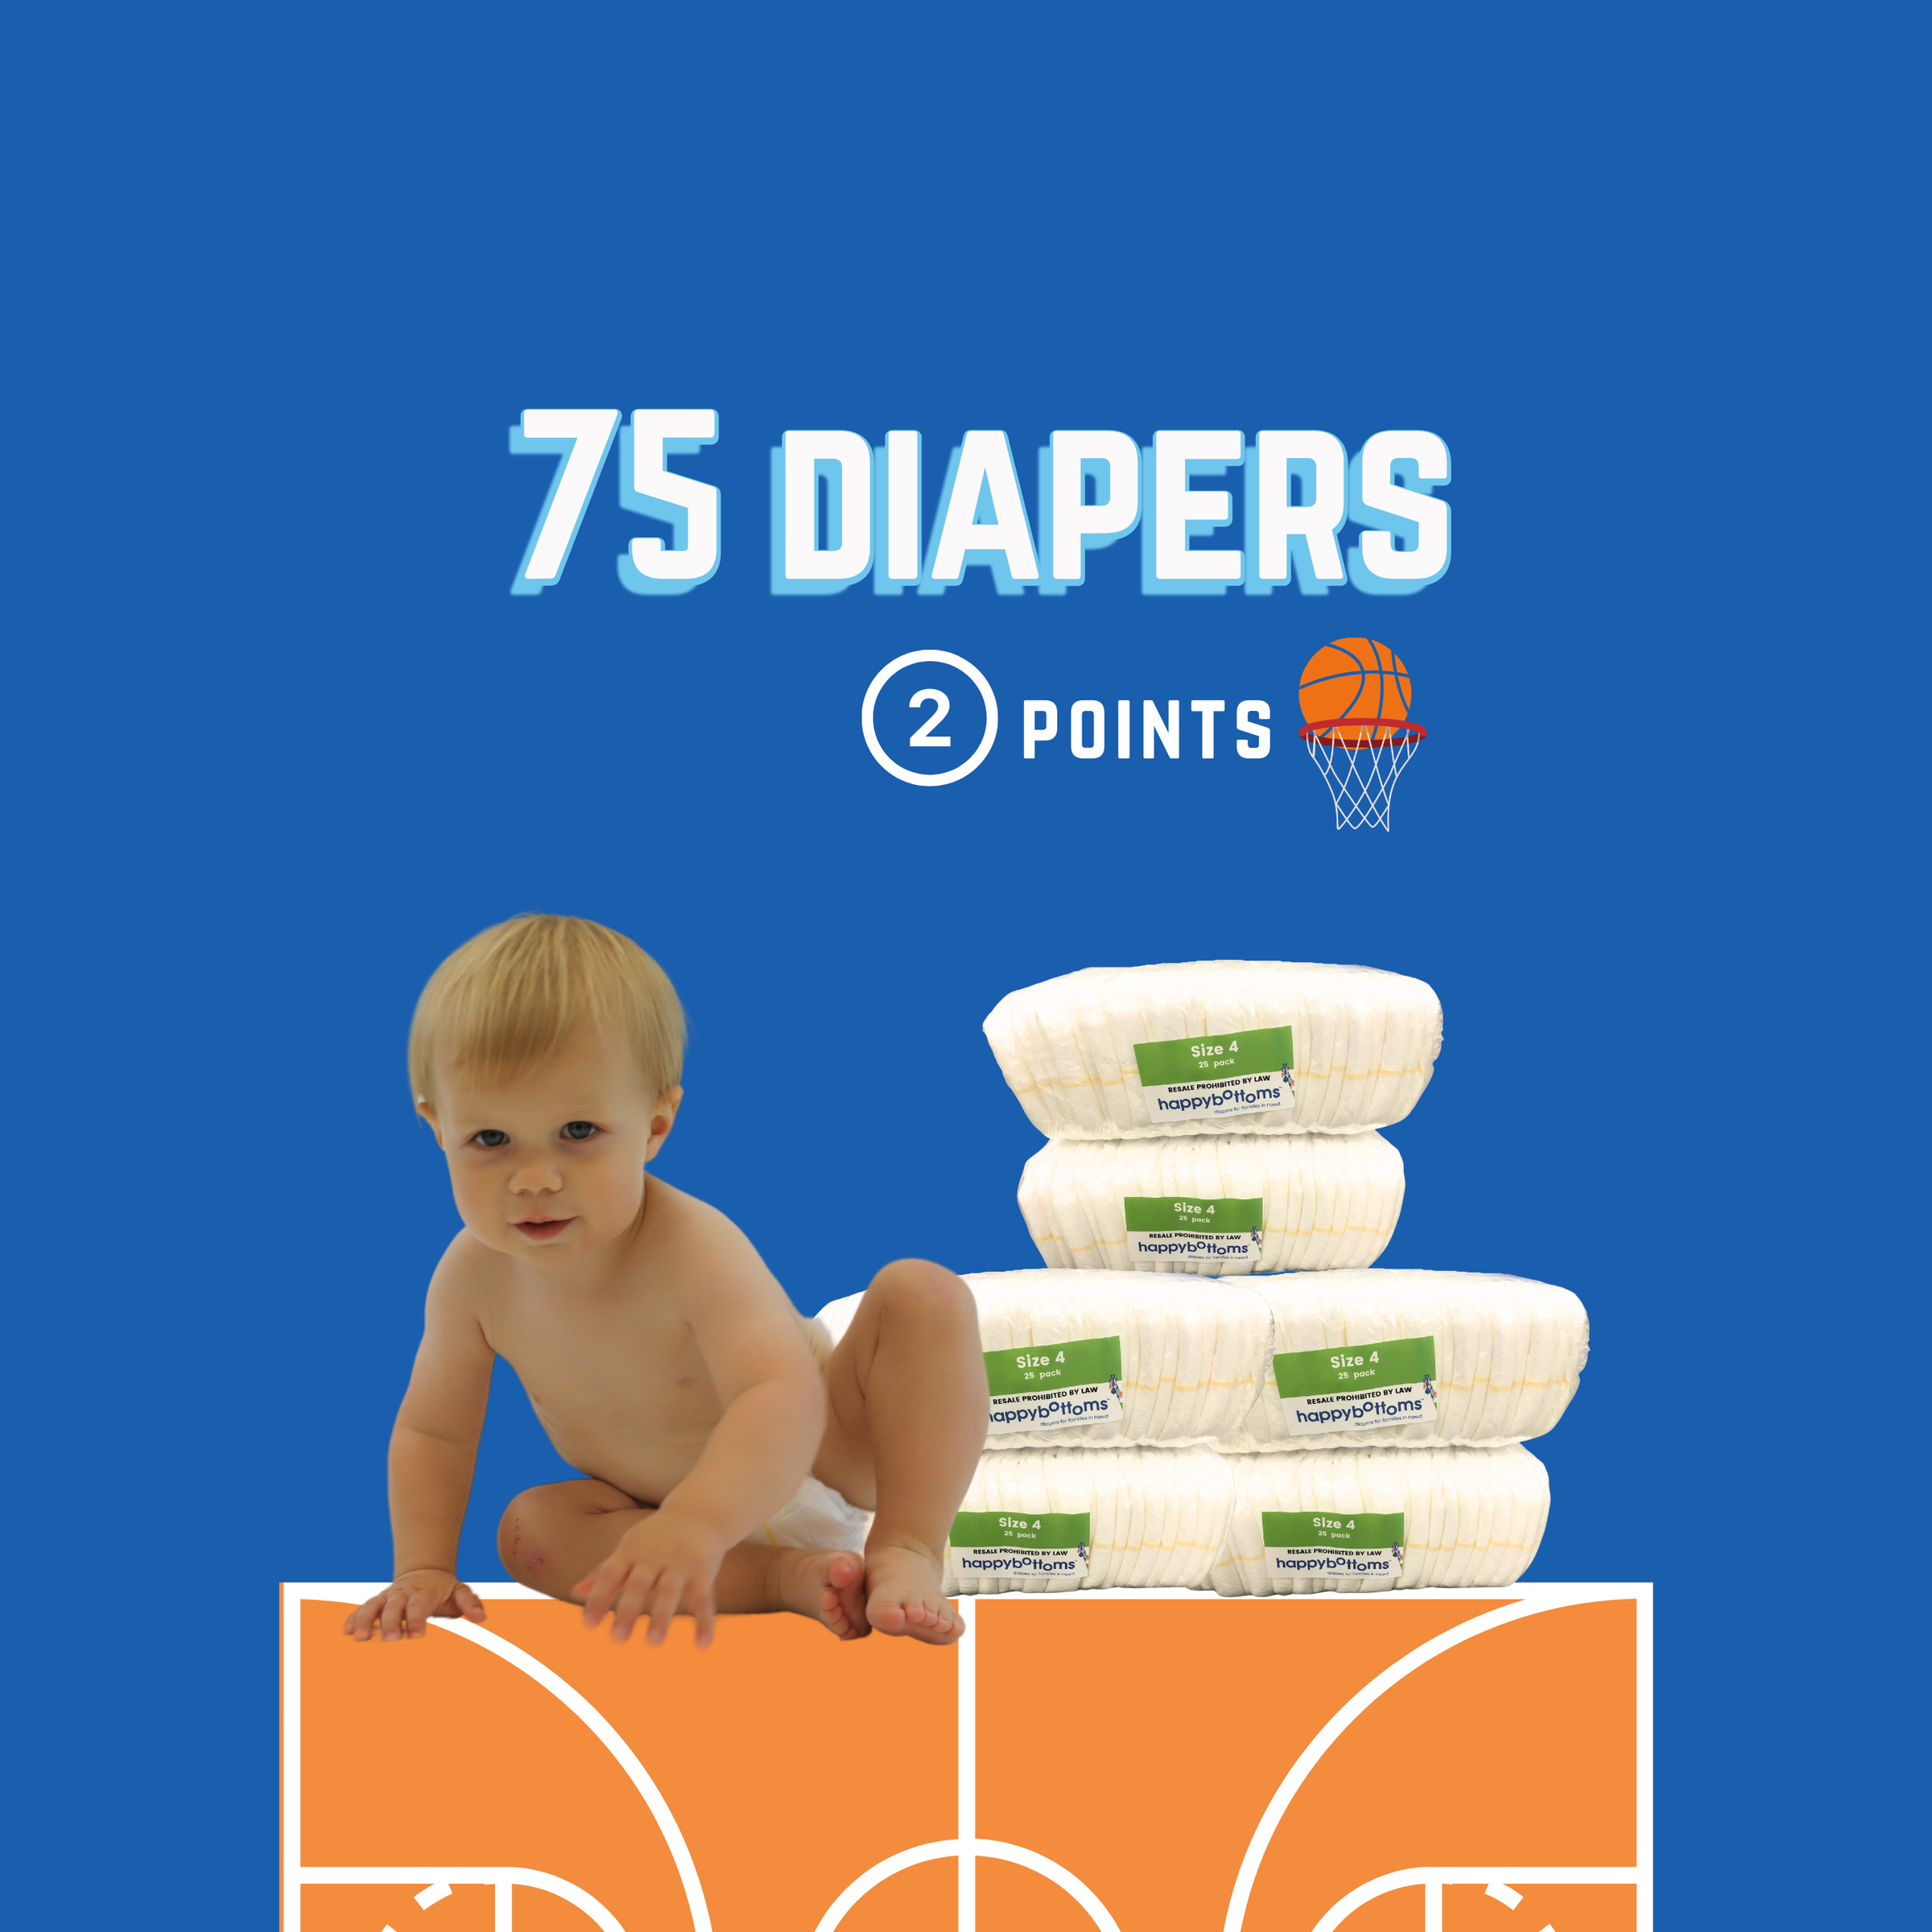 HappyBottoms – Diapers for families in need